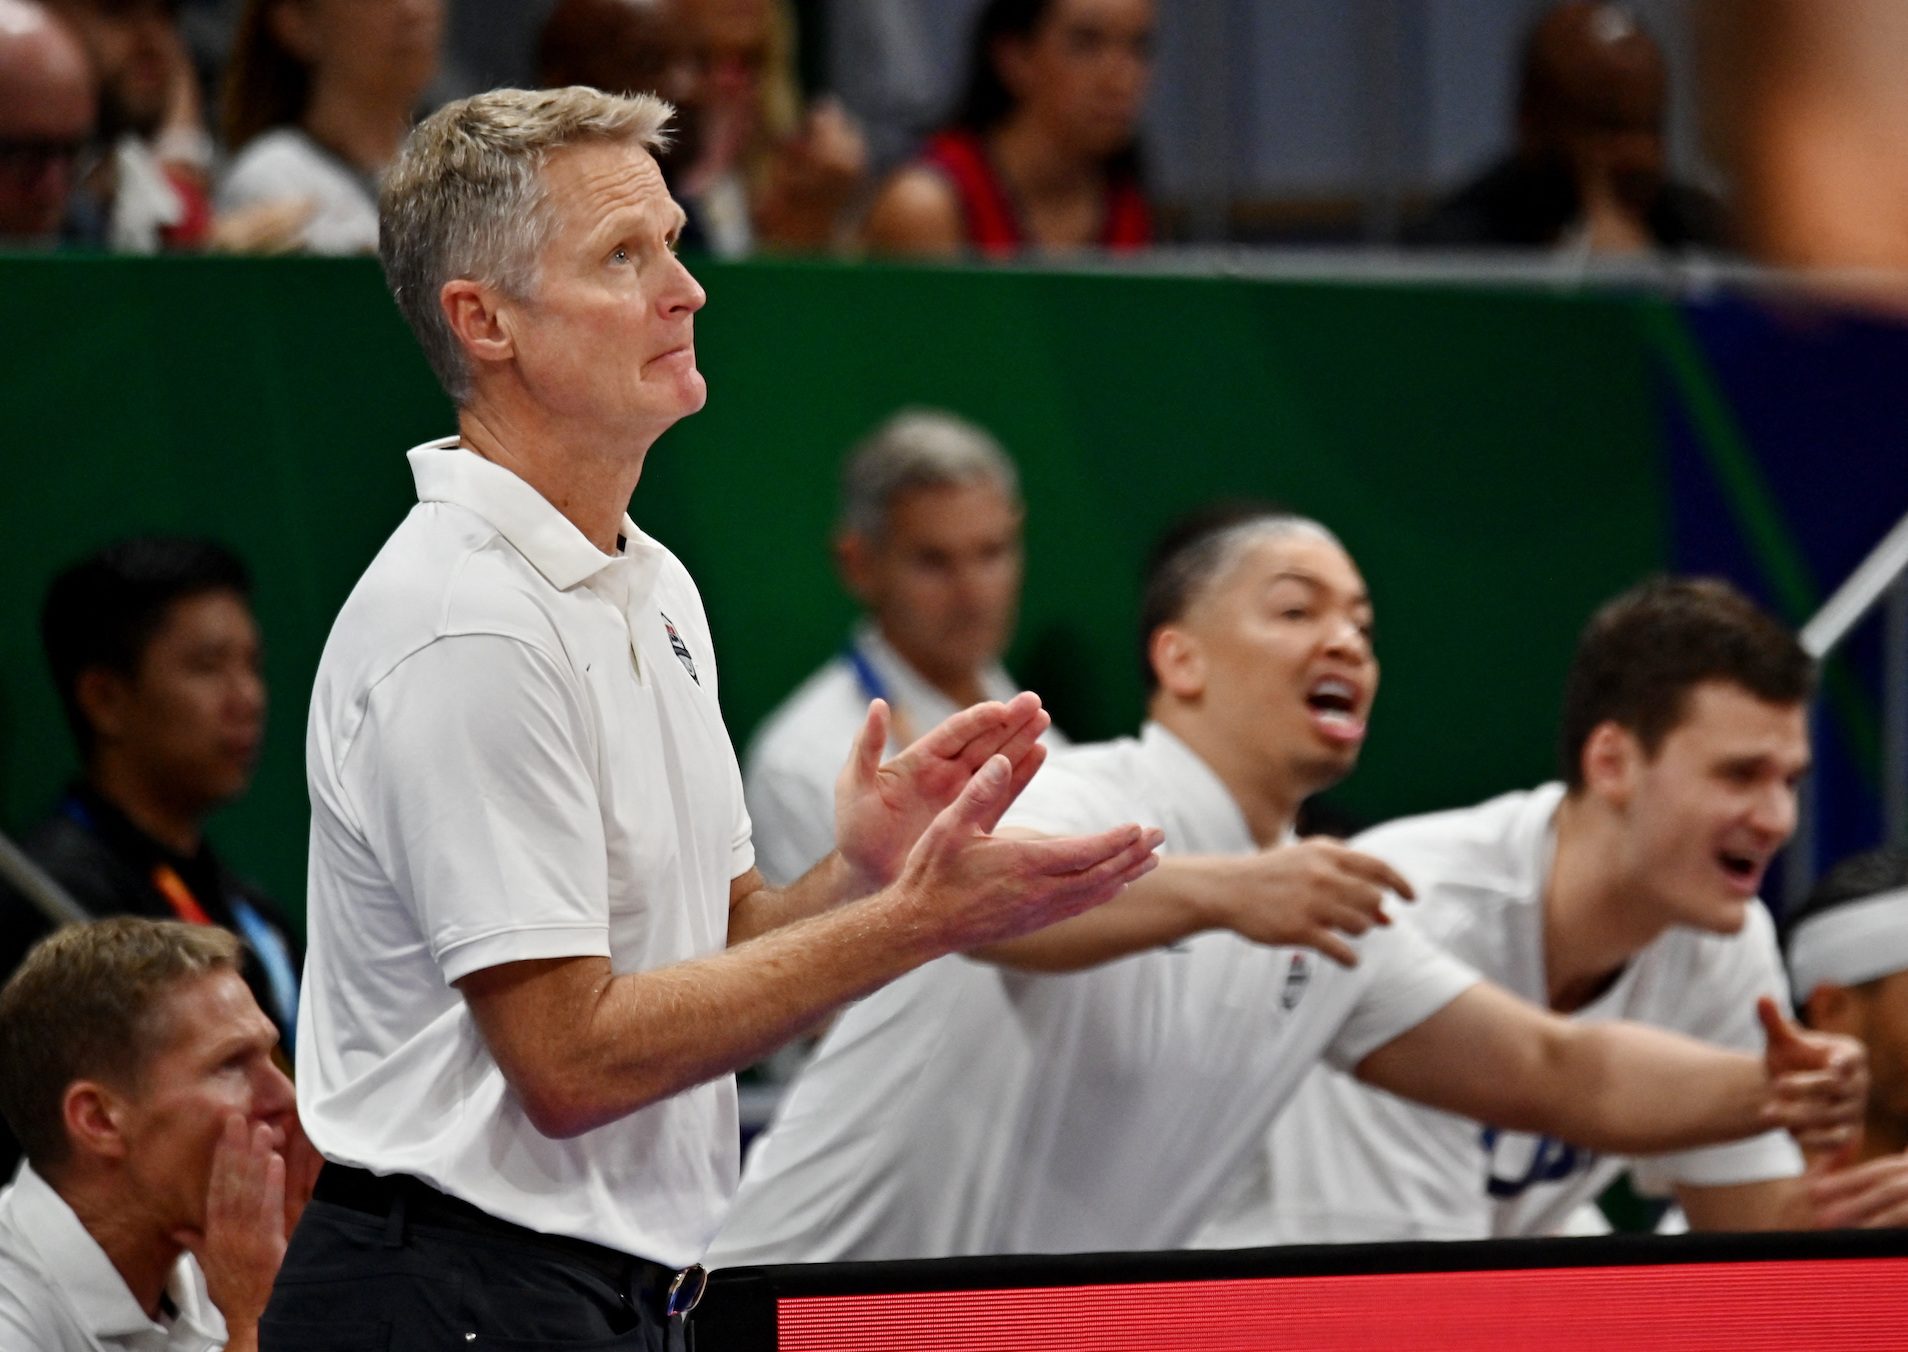 Not USA-centric FIBA World Cup: Steve Kerr shows respect for elite Euro rivals